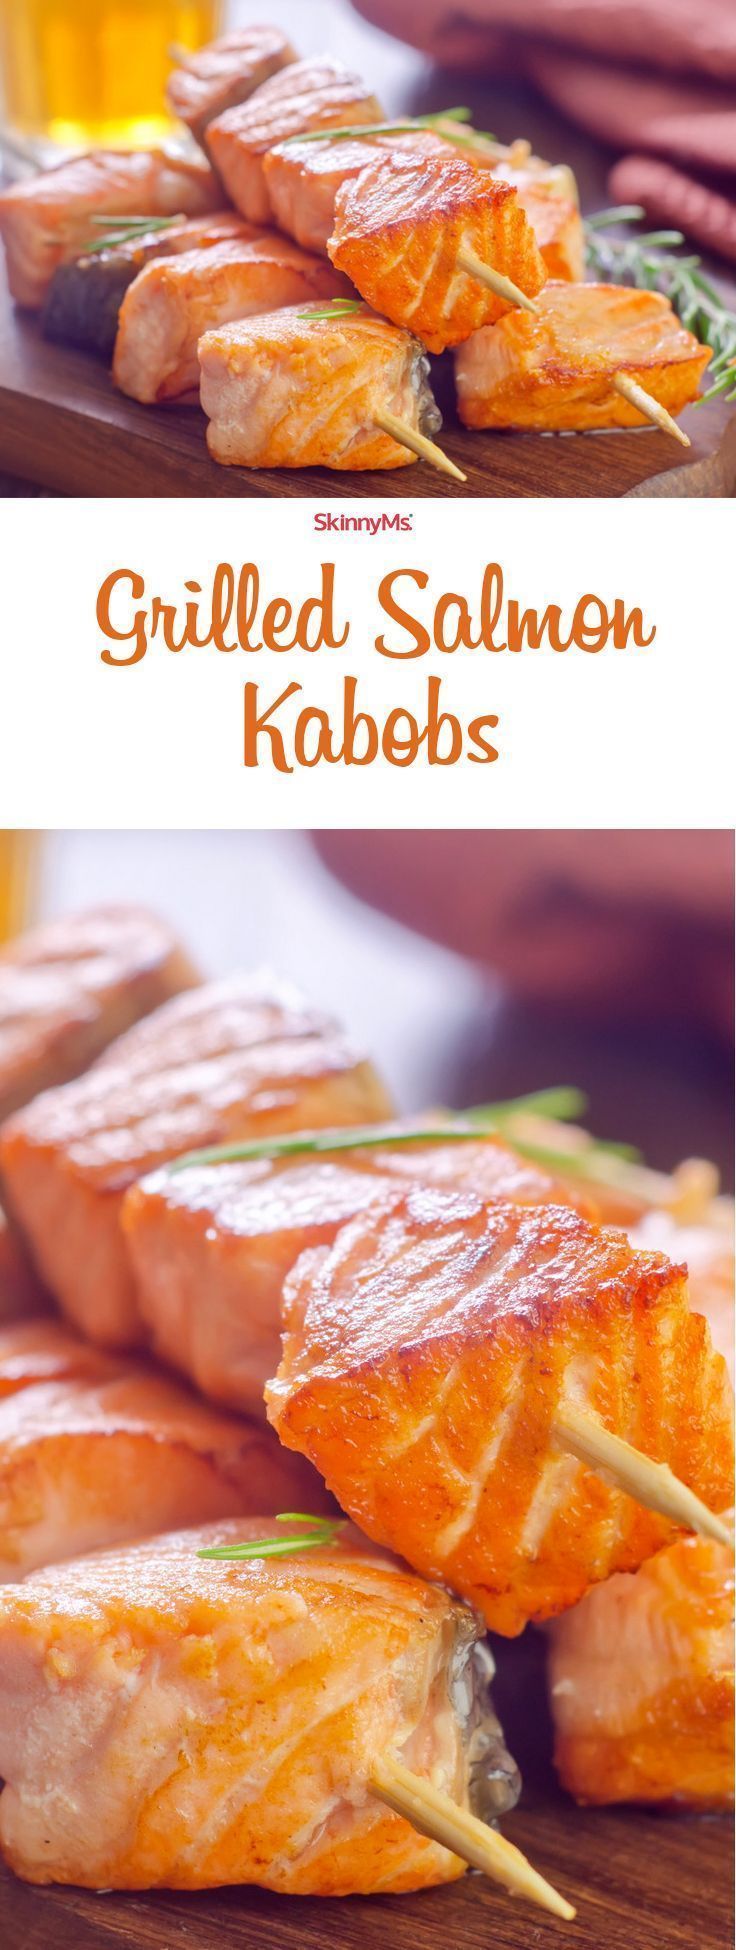 Grilled Salmon Kebobs -   21 grilling recipes for kids
 ideas